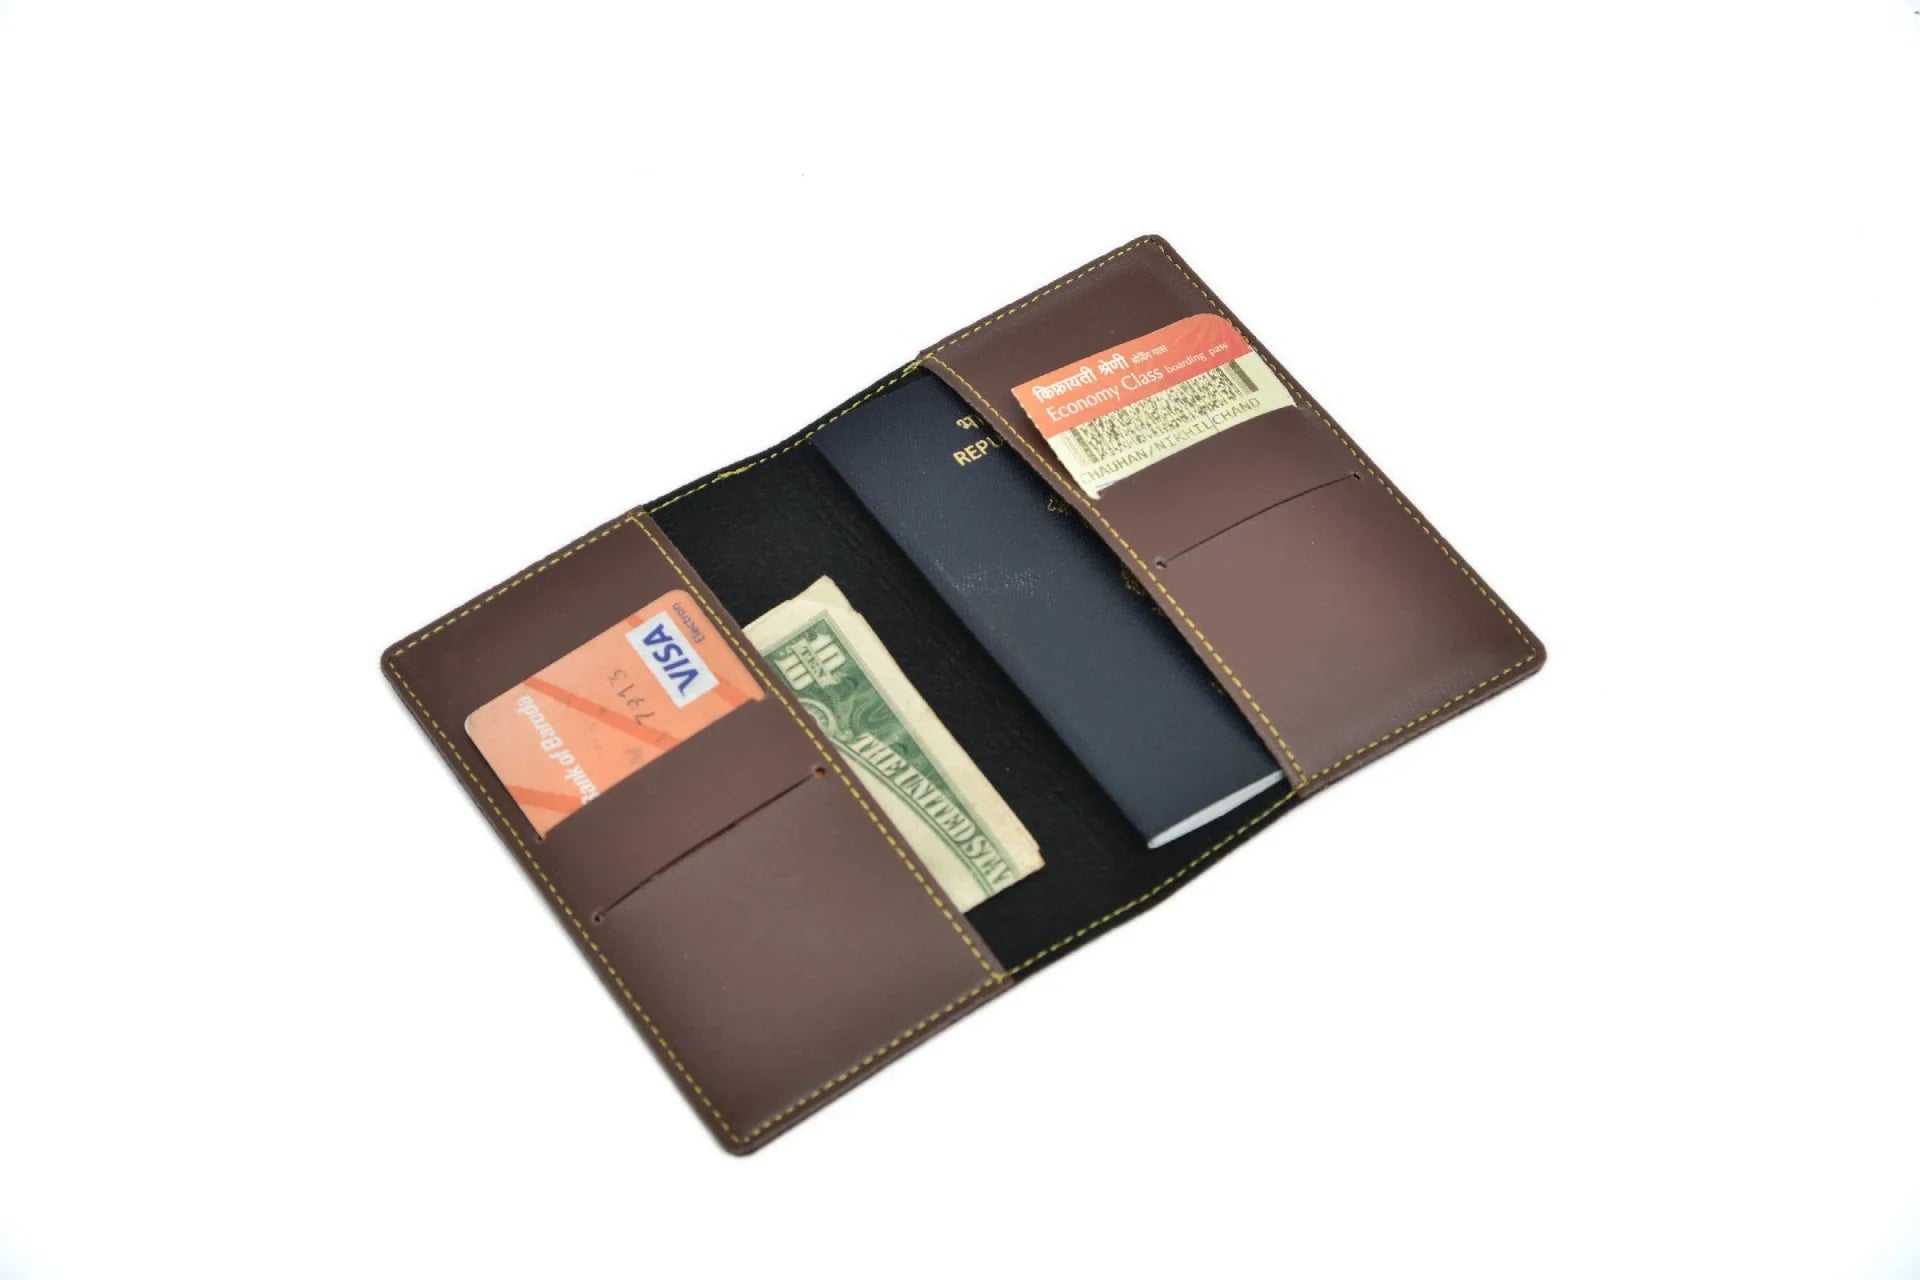 Inside or open view of brown passport case